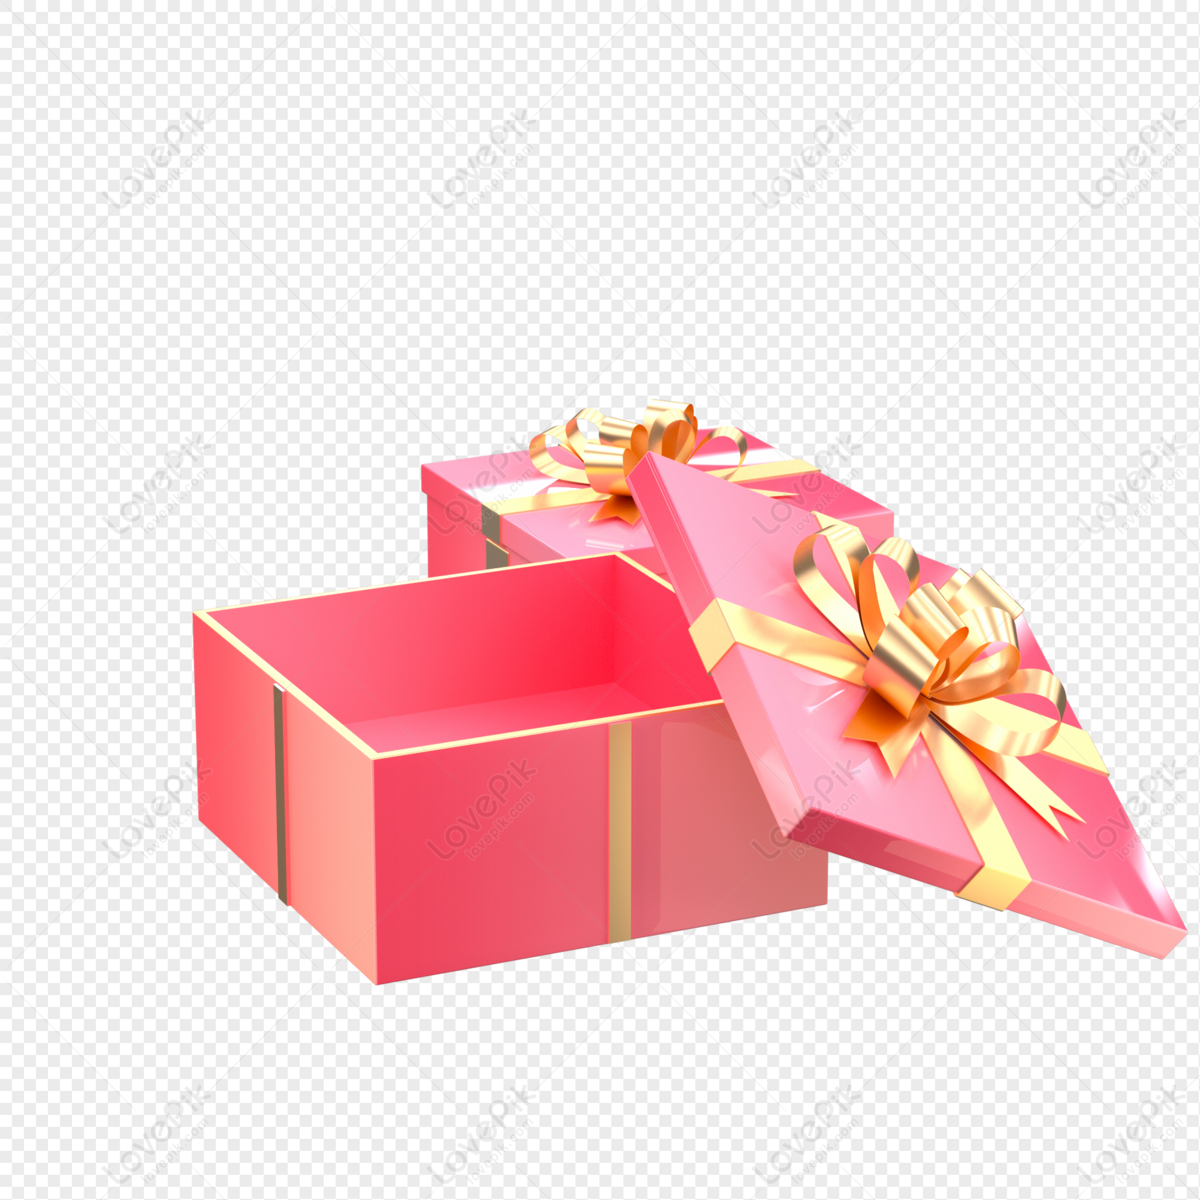 Open The Gift Box PNG Picture, Open Blank Gift Box With Gold Bow  Illustration On Transparent Background, New Year, Celebration, Gift PNG  Image For Free Download